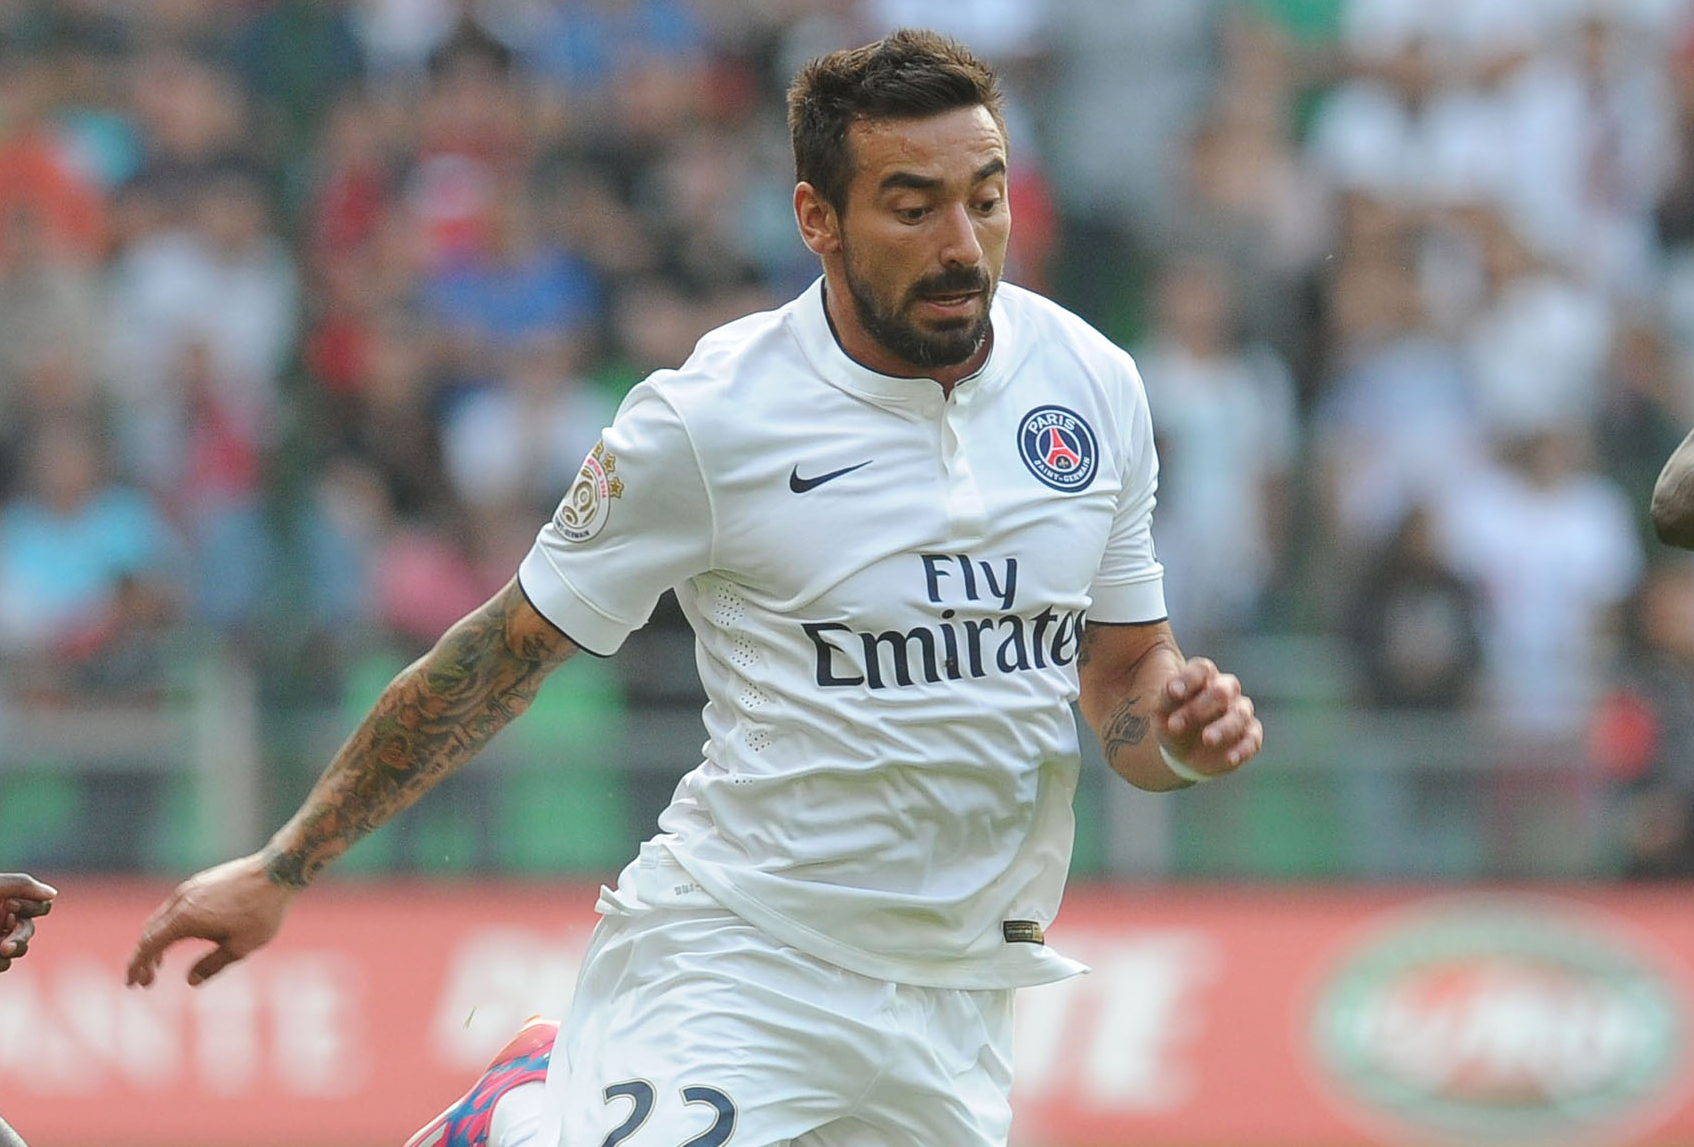 GDS: Lavezzi suspended for 2 games by PSG